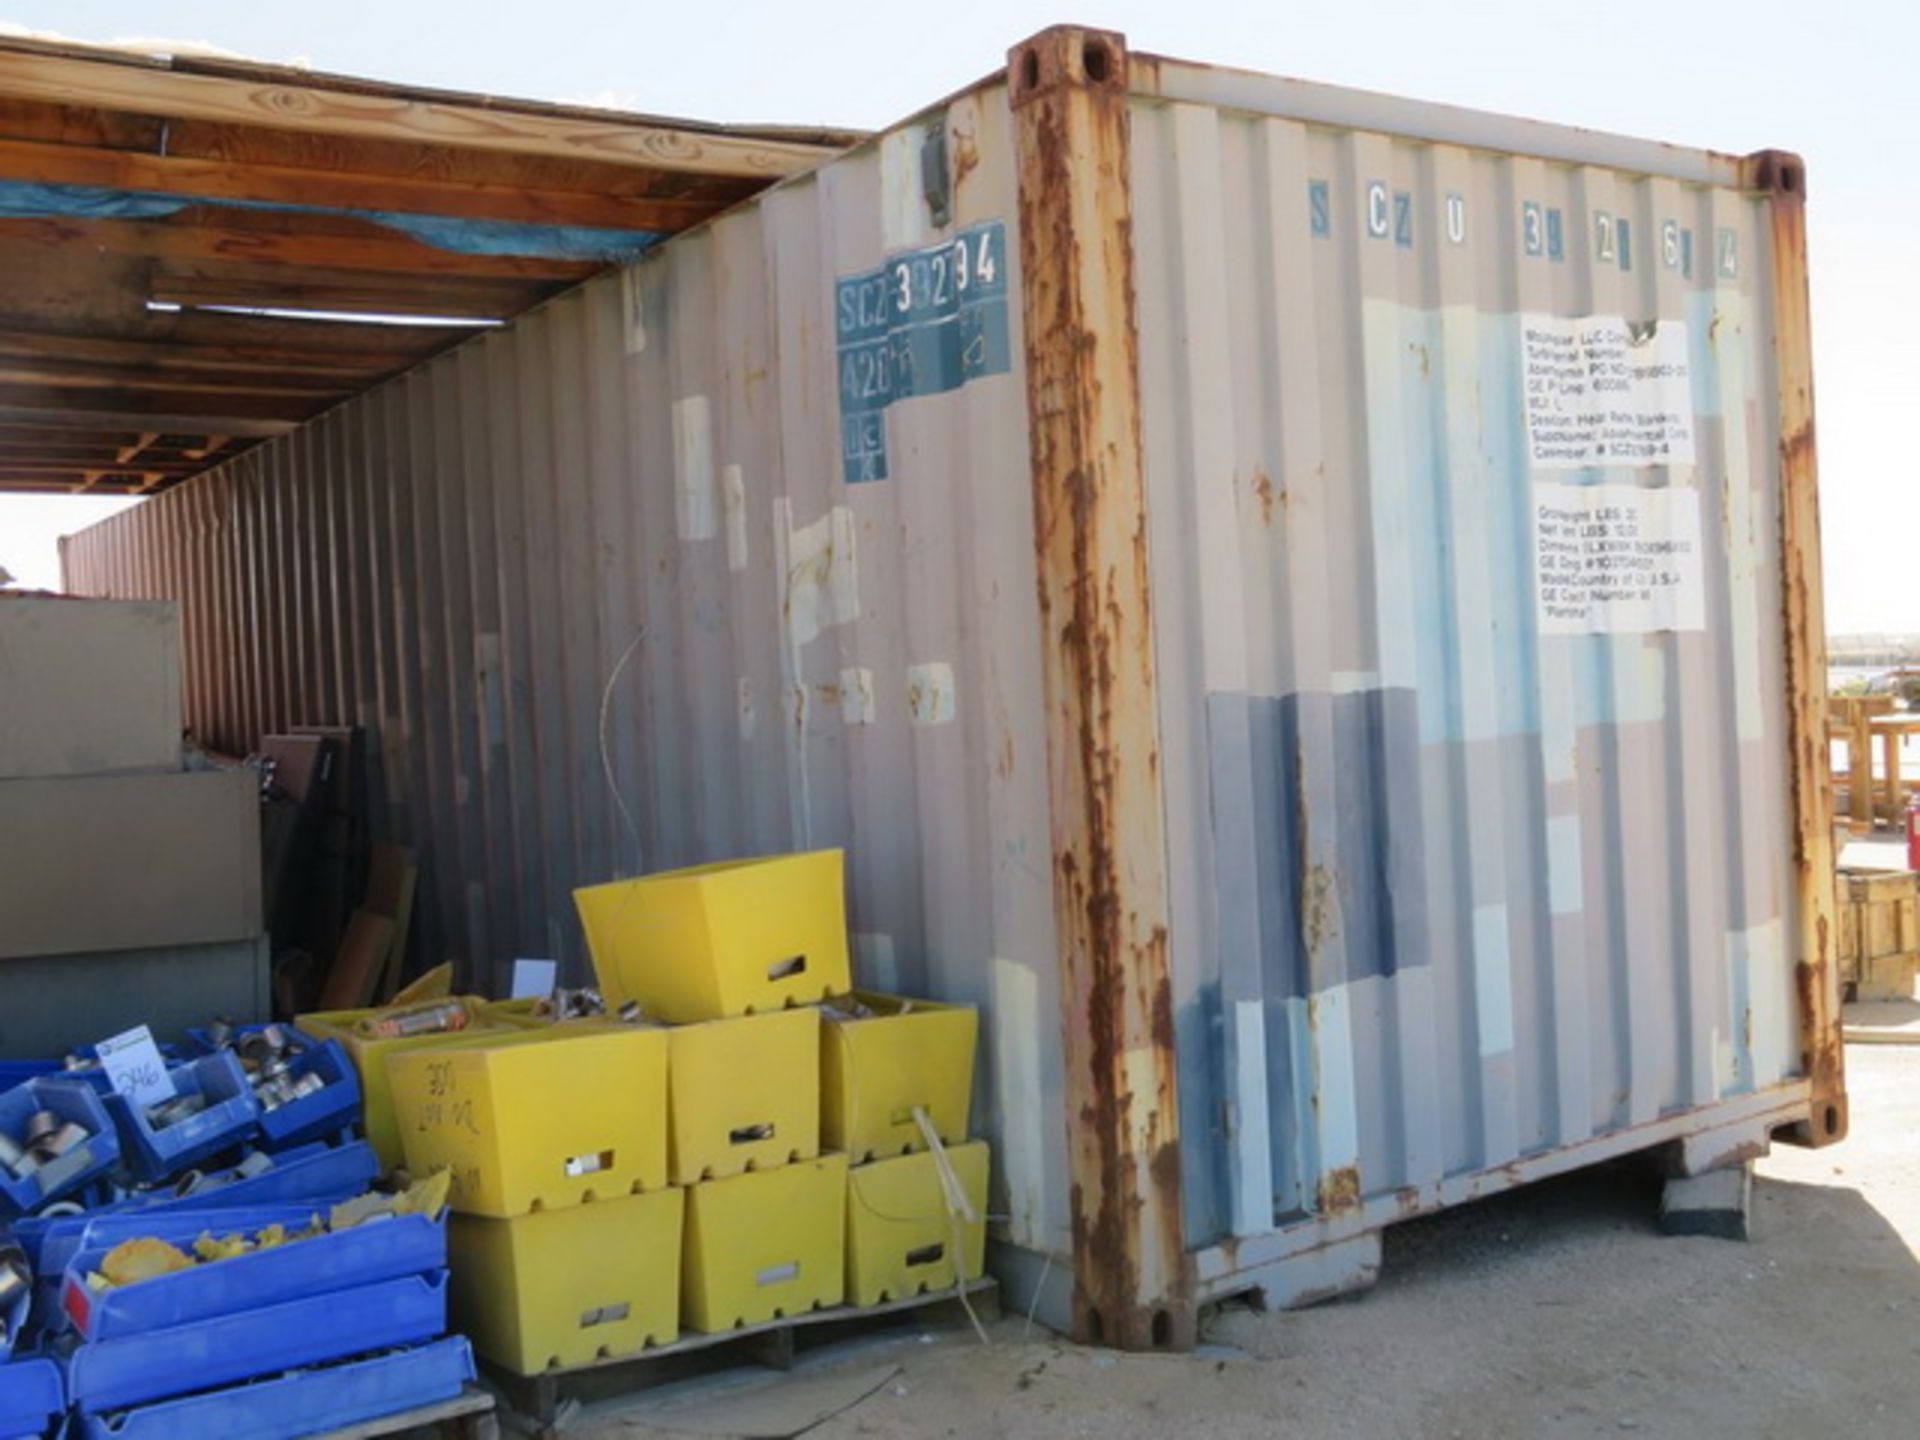 Xinhui CIMC Container Co. 1AA-147GC40 Shipping Container, 40' x 8' x 102"H, 2,389 Cu.Ft, 7,940 LBS - Image 3 of 6